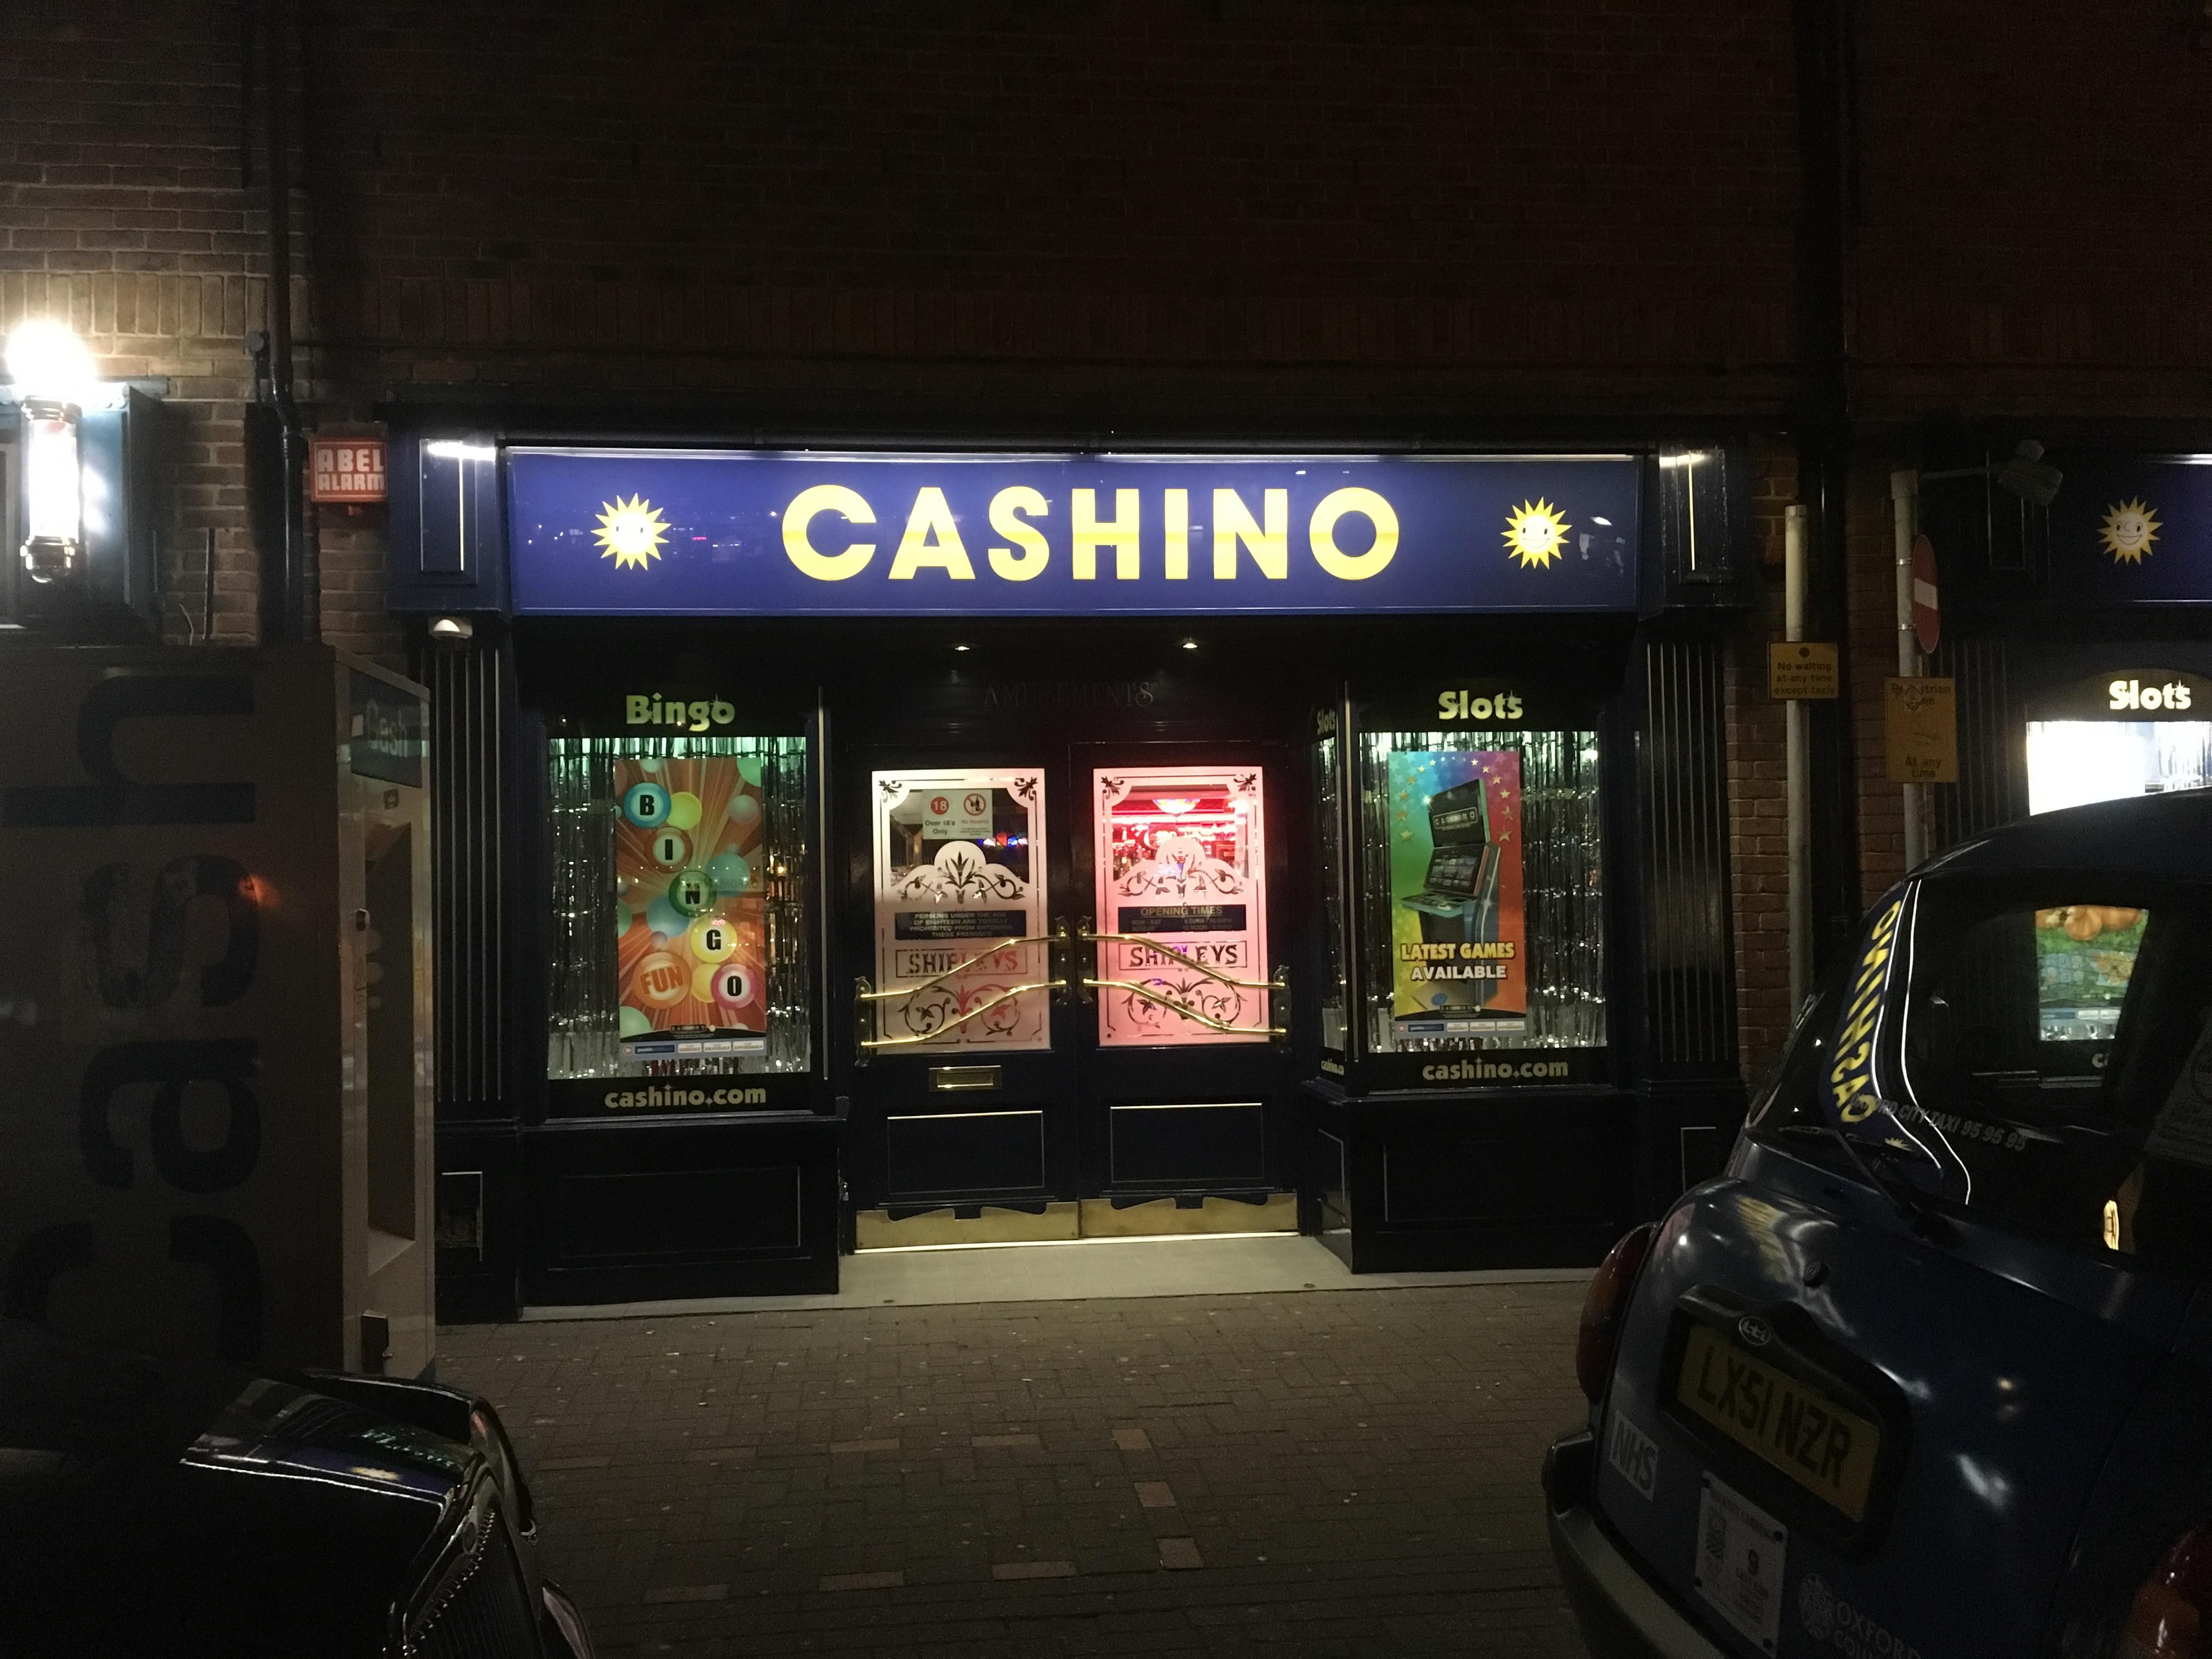 Where does Sean Connery like to gamble?